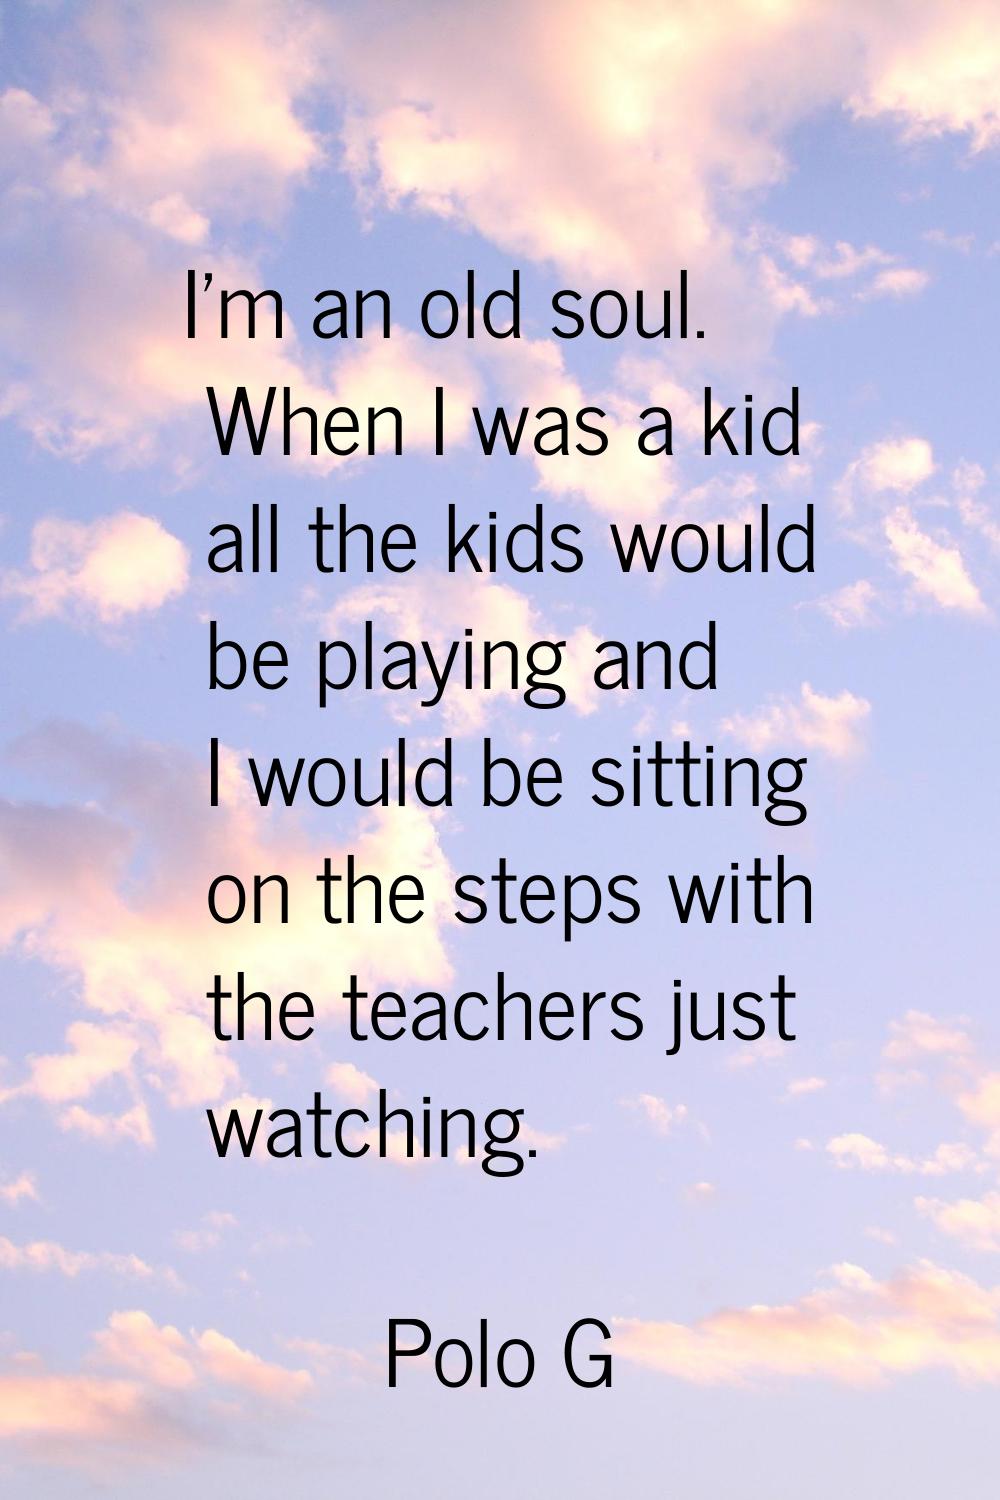 I'm an old soul. When I was a kid all the kids would be playing and I would be sitting on the steps